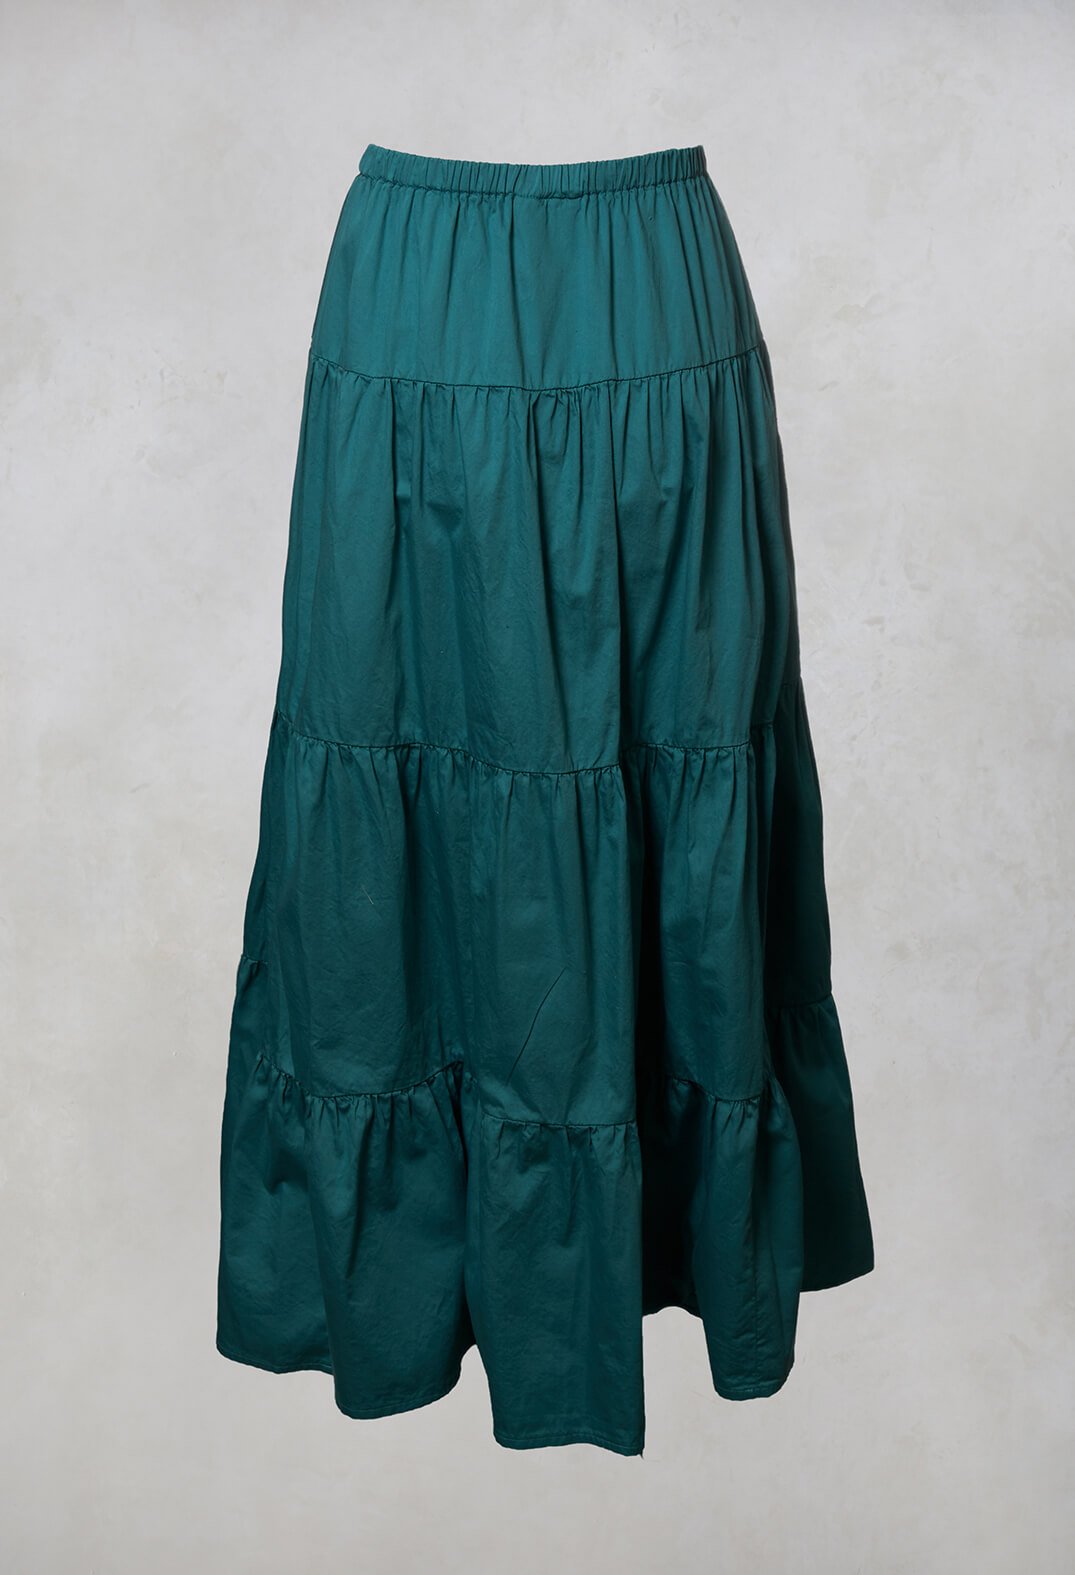 Sharm Maxi Gathered Skirt in Teal